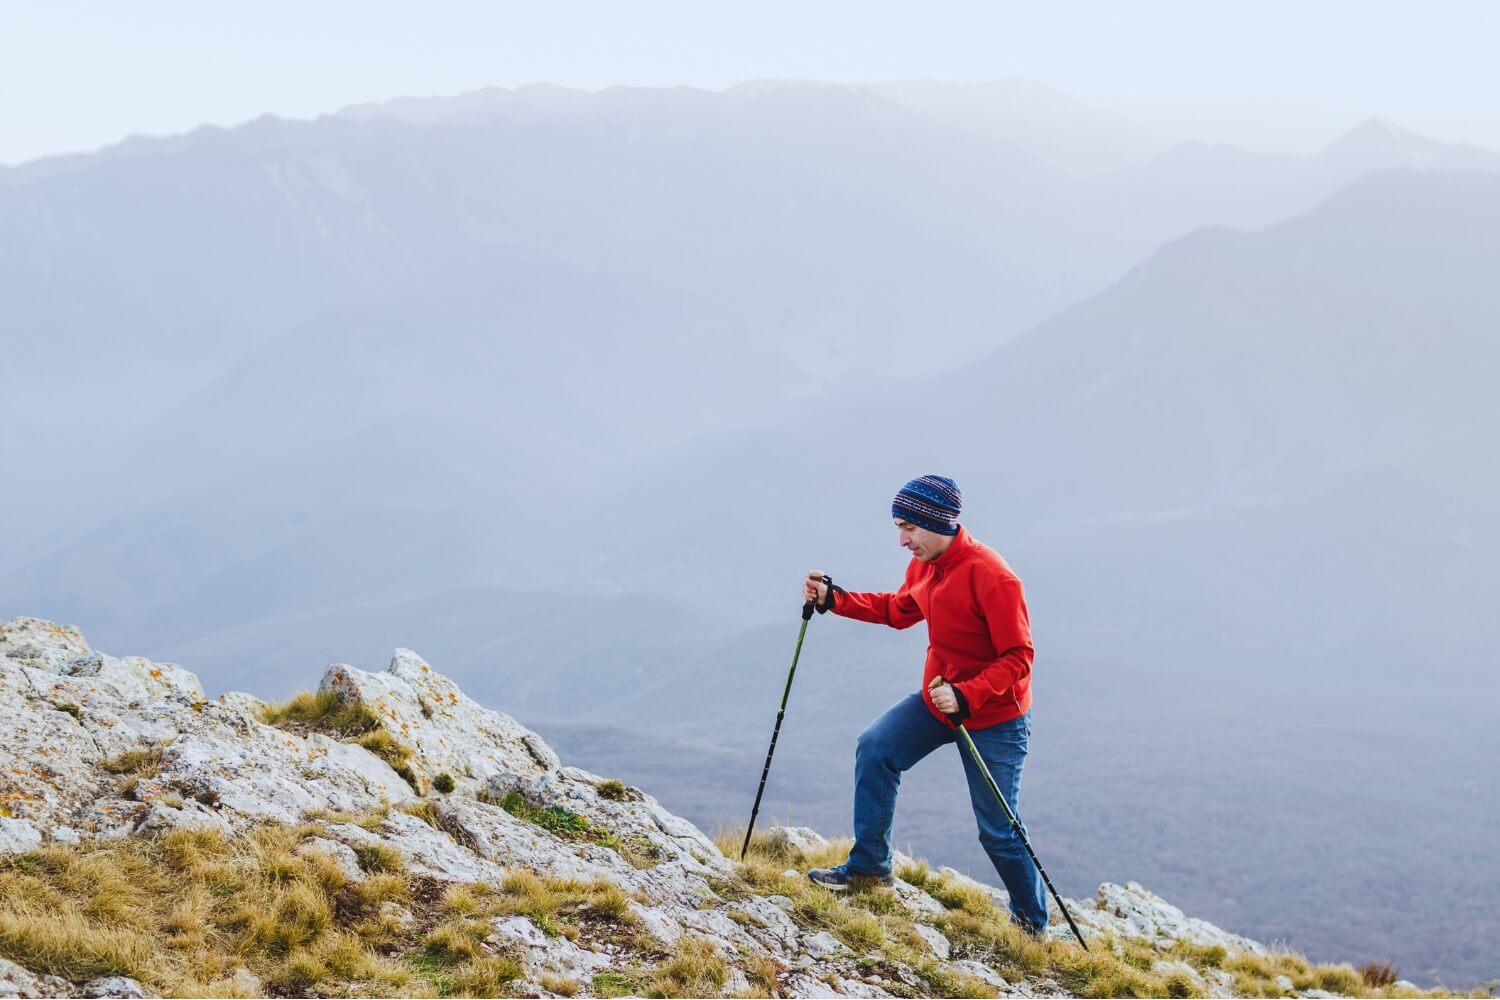 WHAT TO KNOW BEFORE BUYING A TREKKING POLE